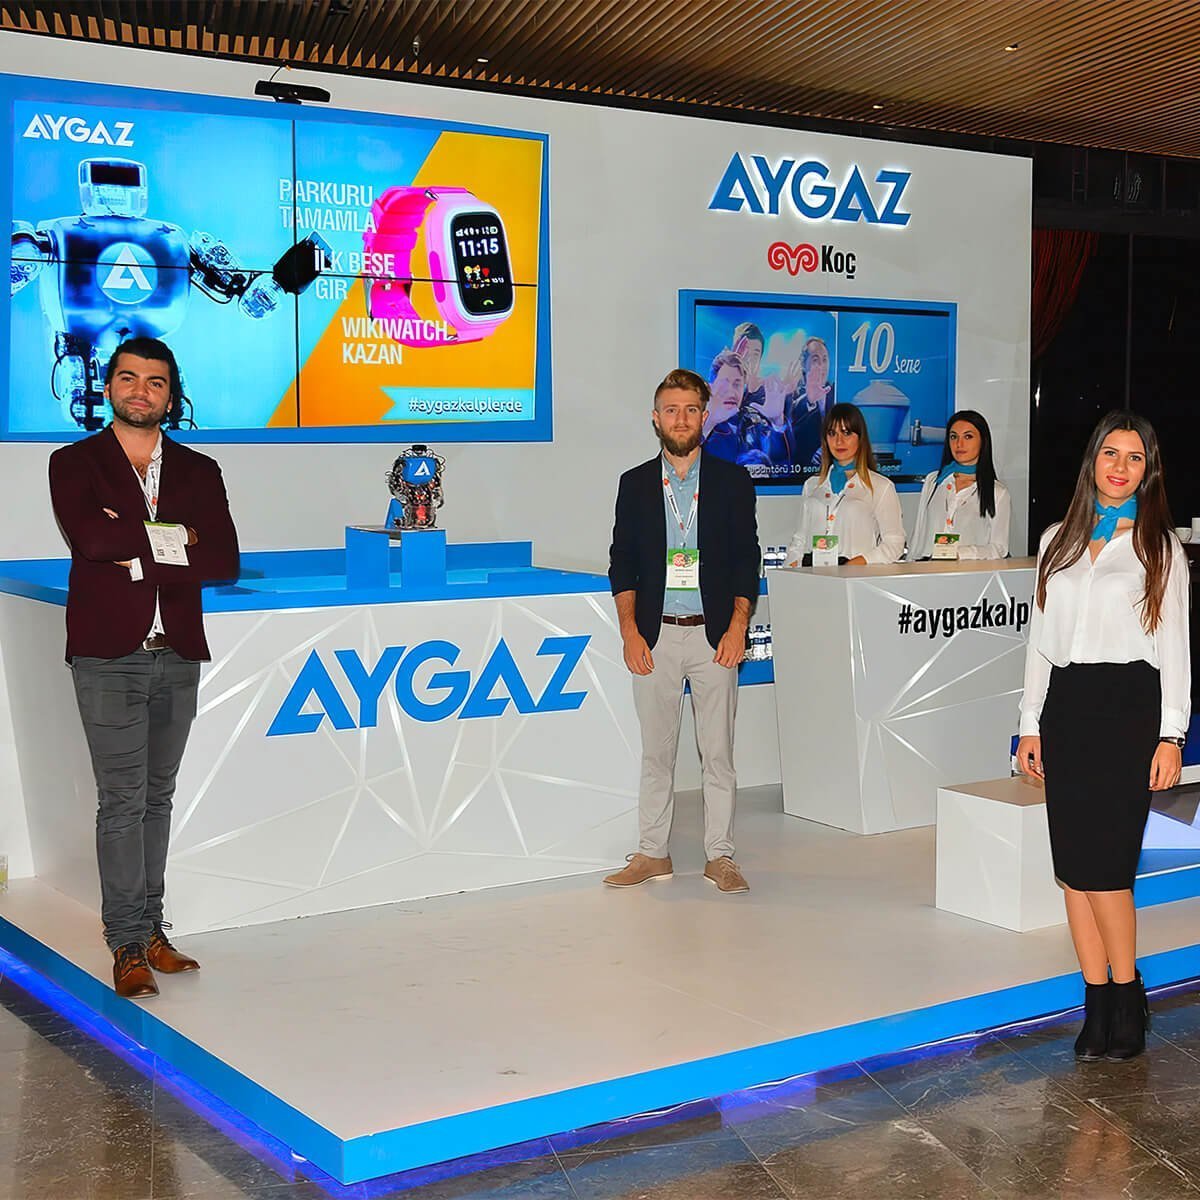 AYGAZ Brought Technology and Entertainment Together at Brandweek